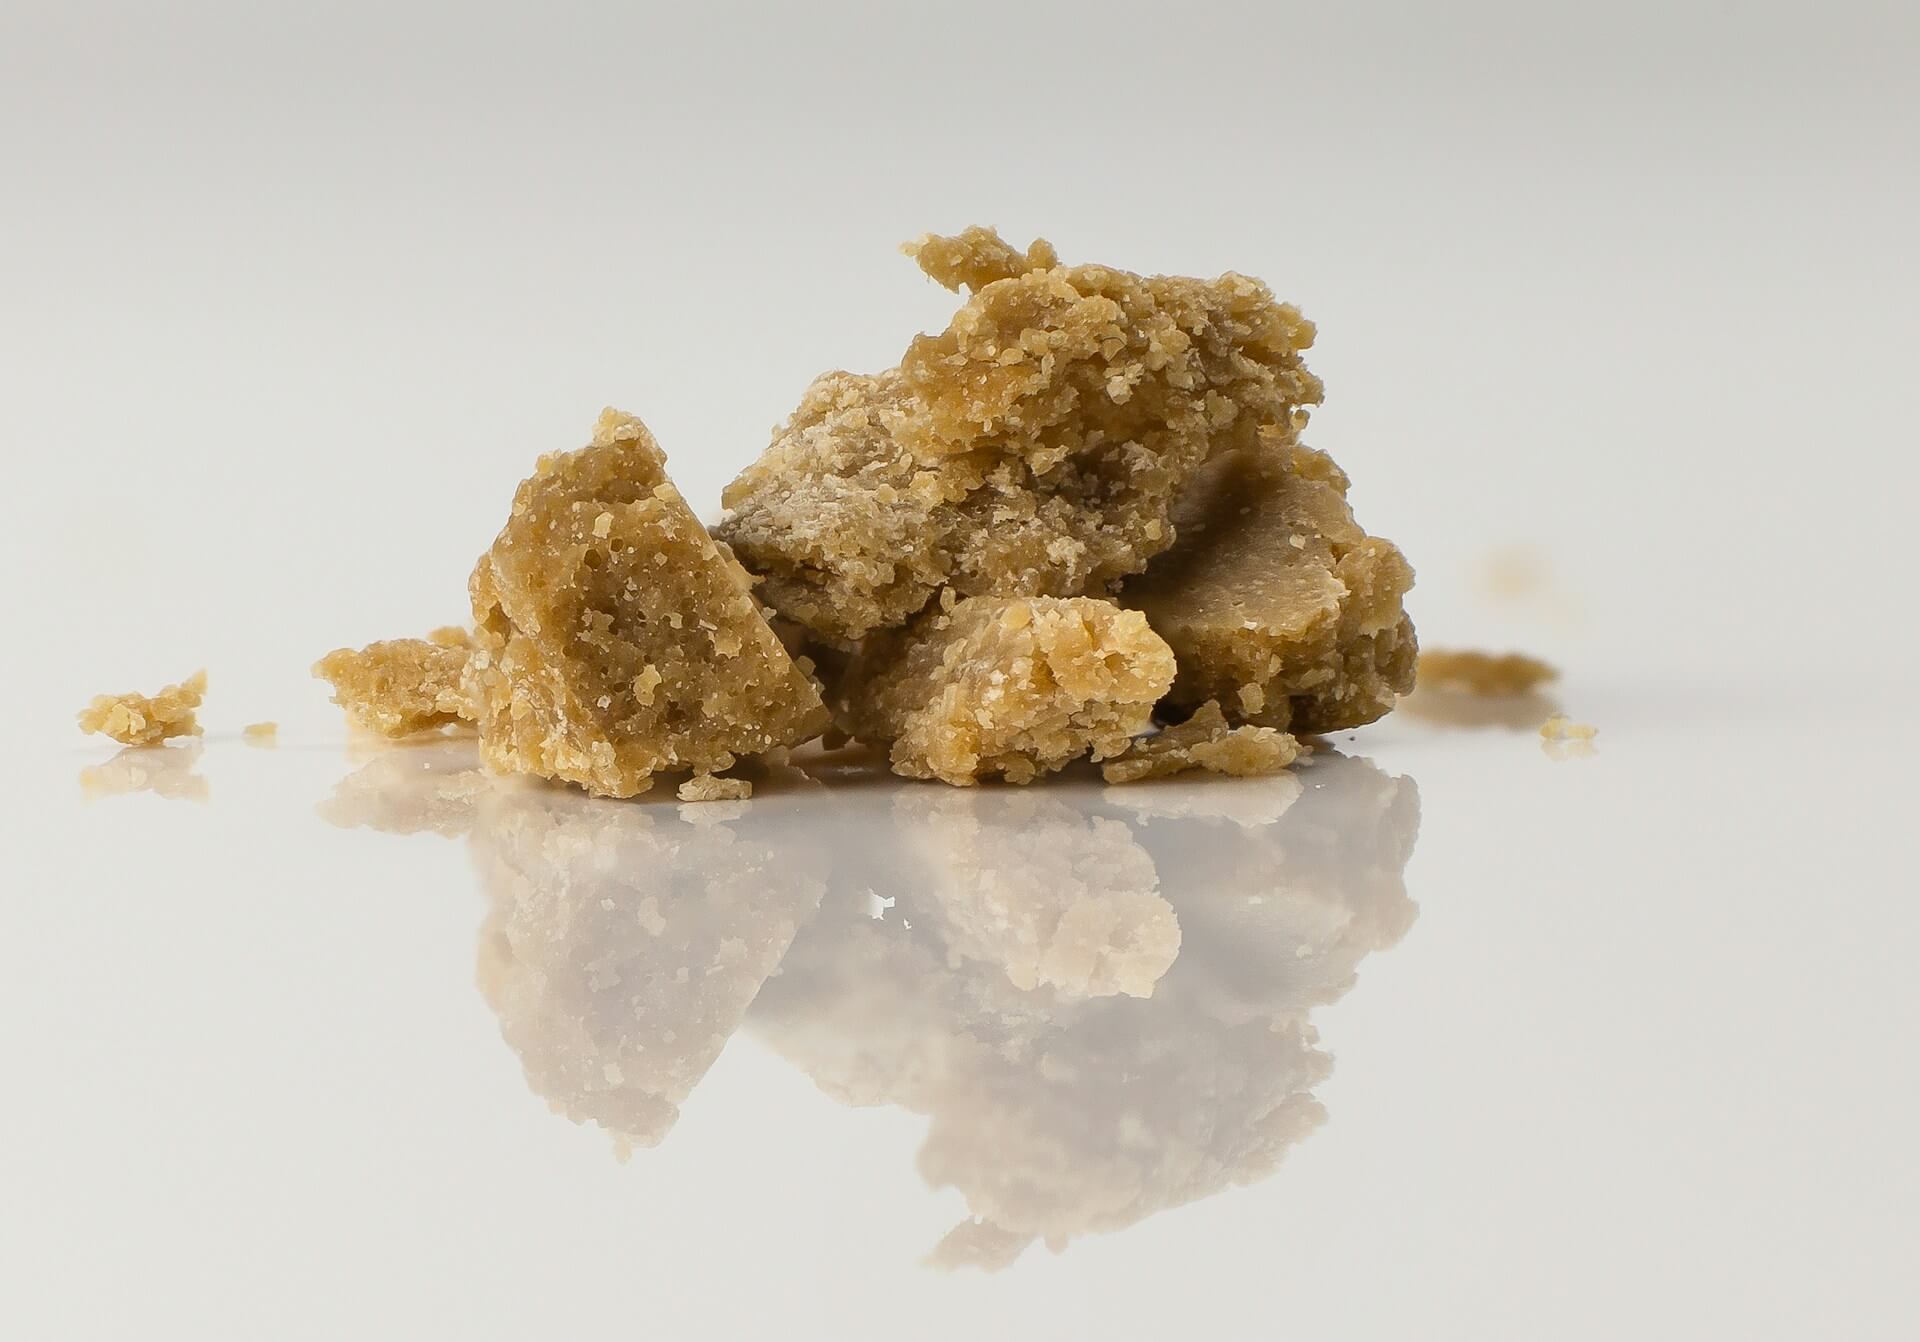 Close-up photo of cannabis extract on white plate